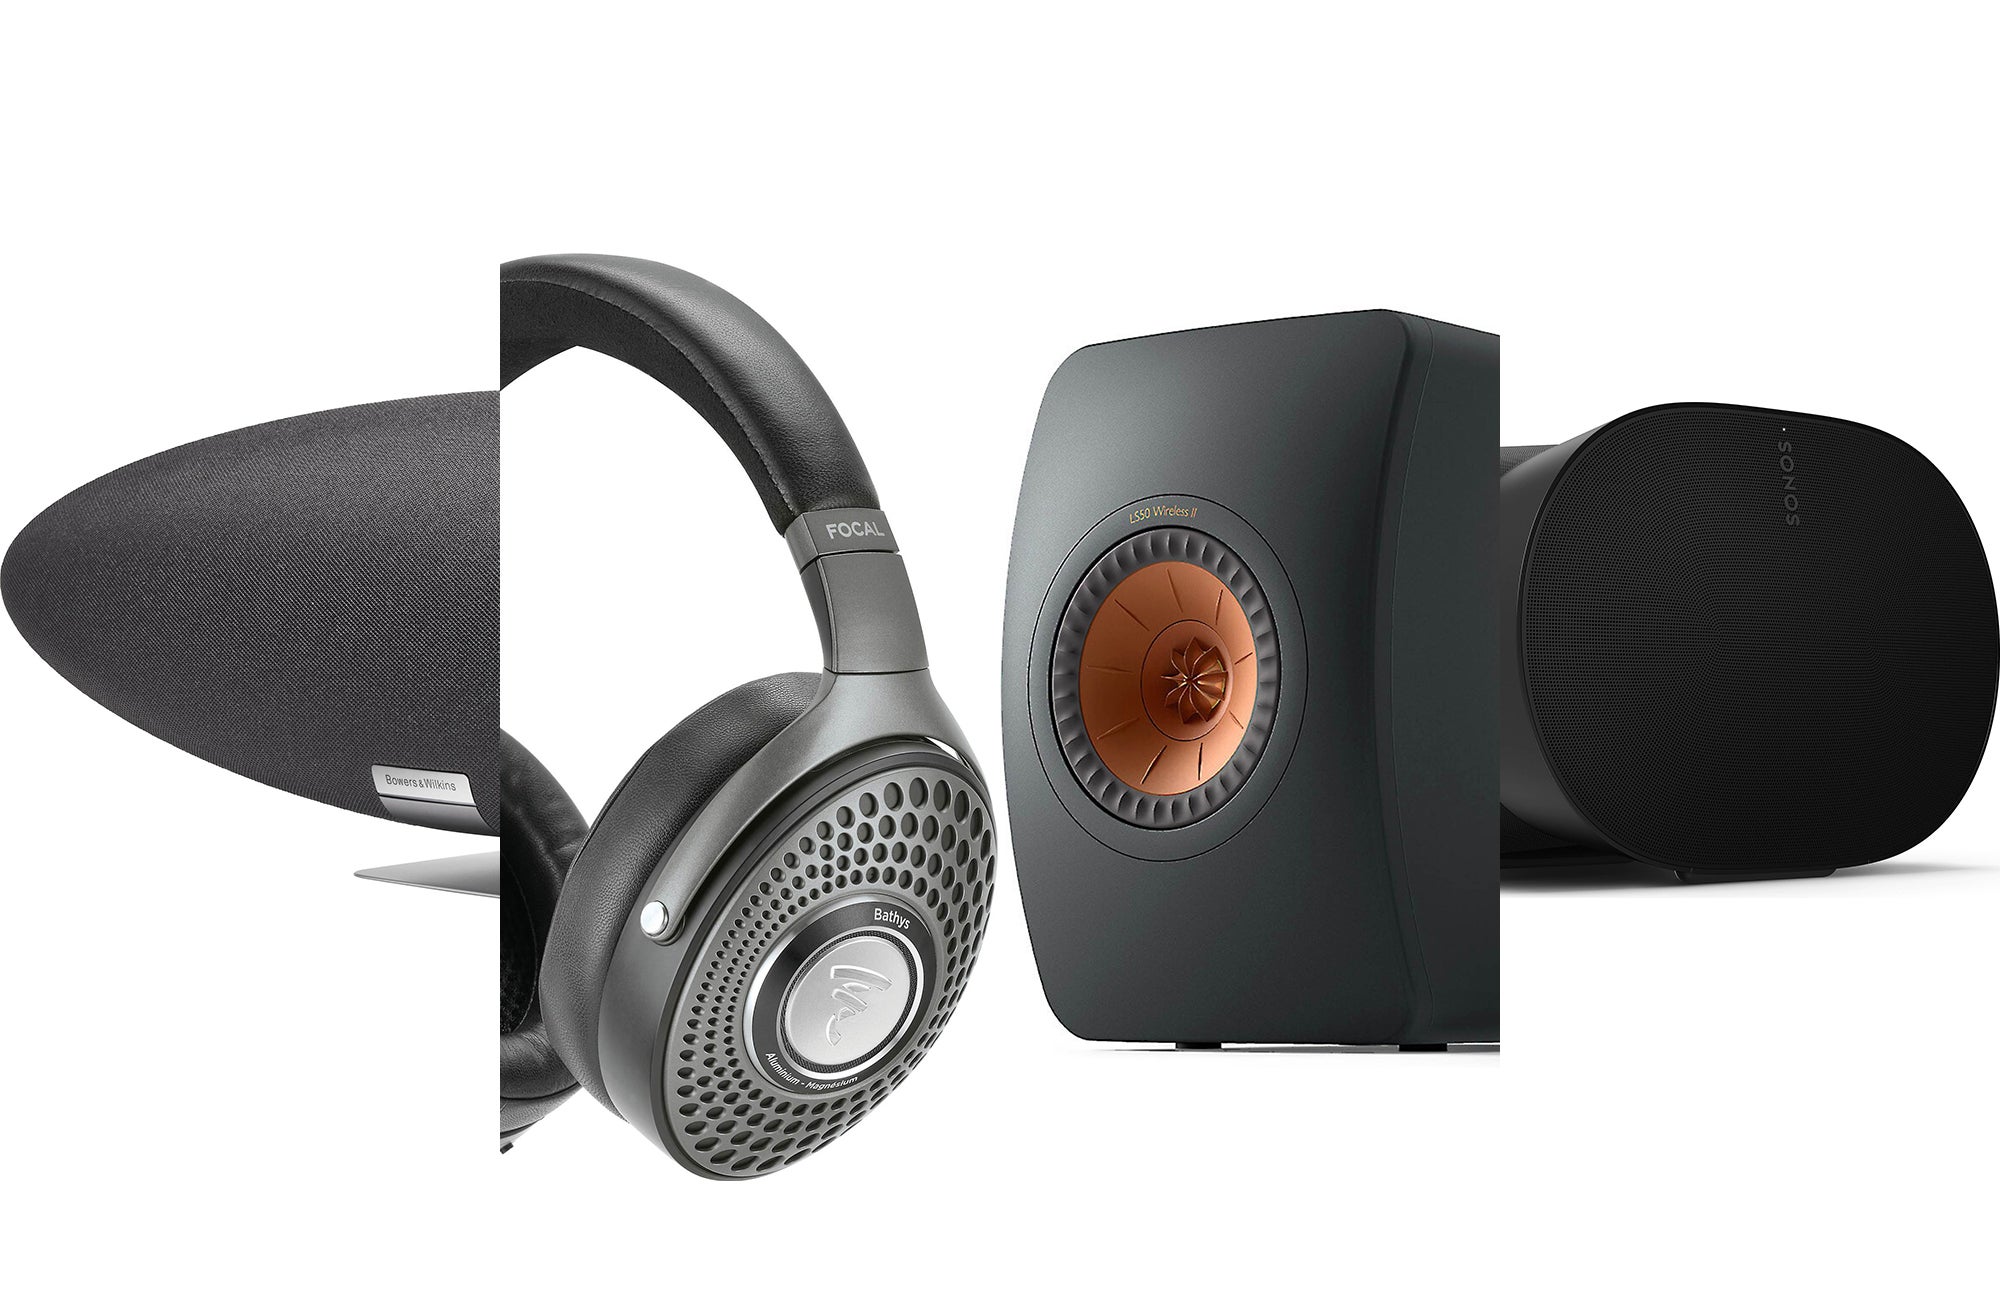 Get the best for less with Crutchfield audio deals